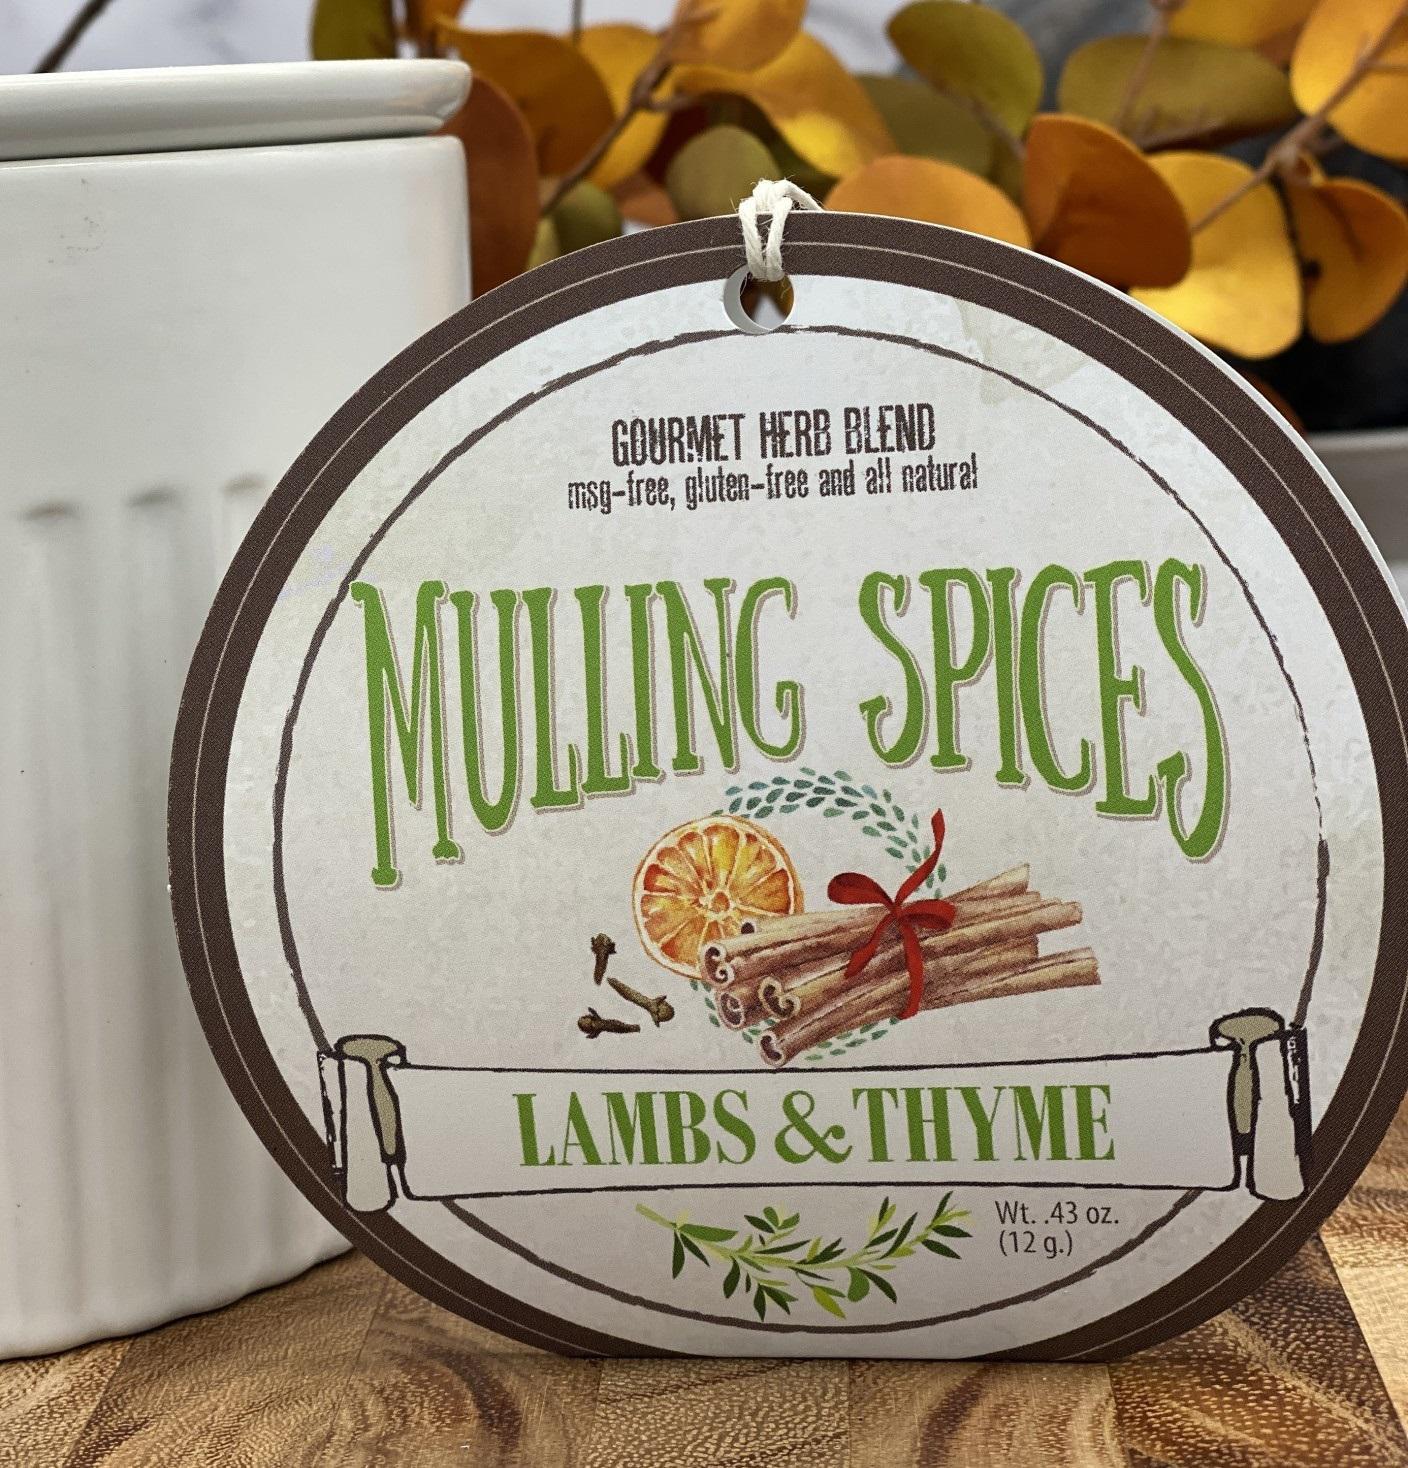 Gourmet Herb Blend | Mulling Spices